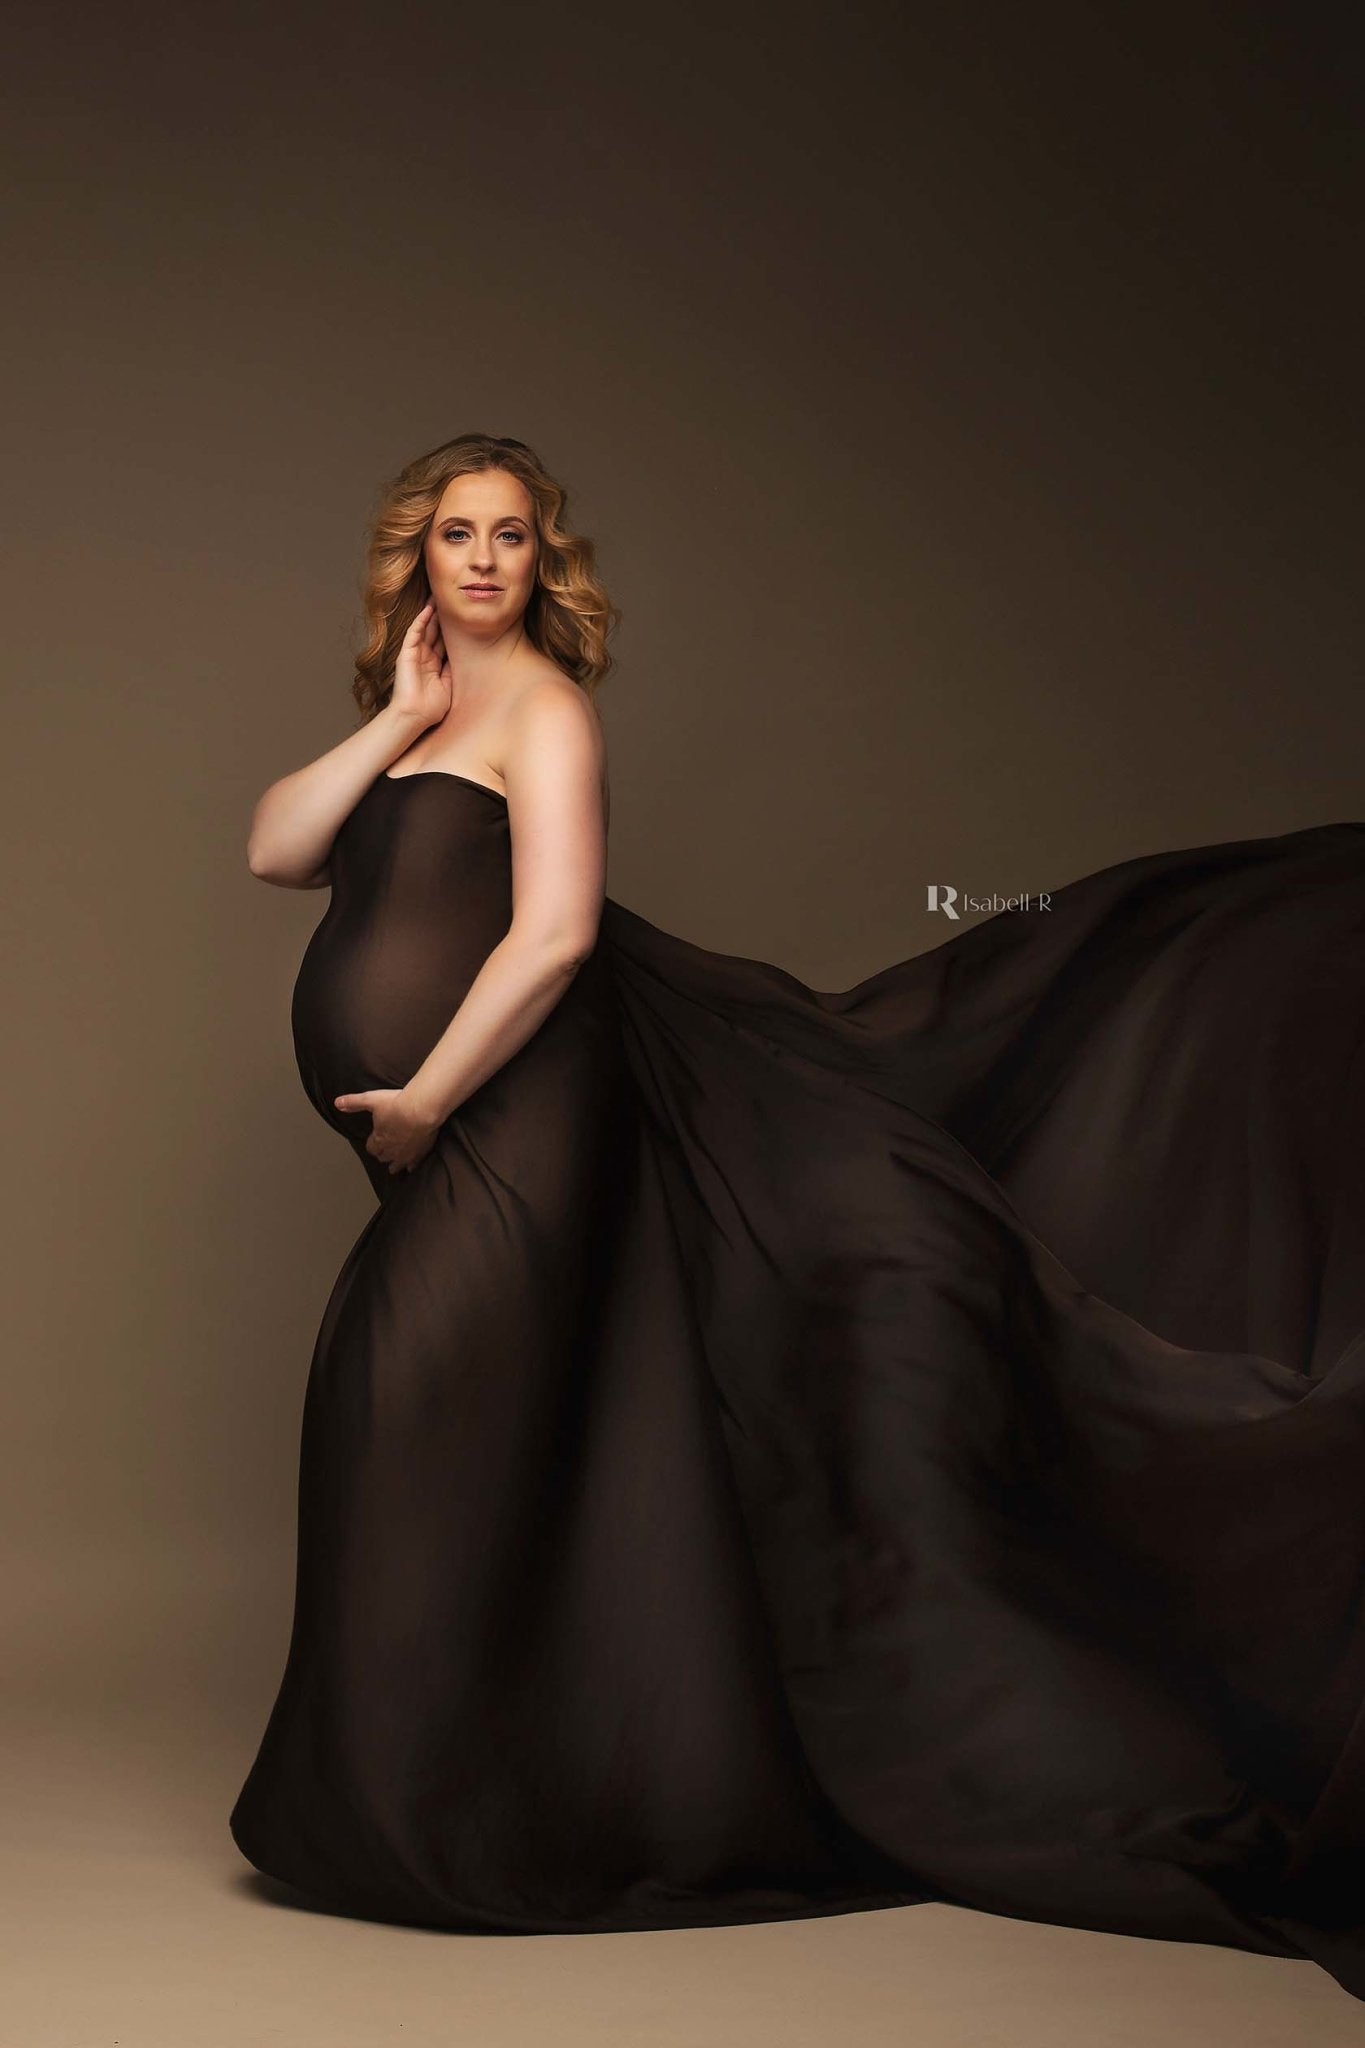 A pregnant woman is wearing a scarf as a dress. The scarf is in the colour brown. She has short blonde hair